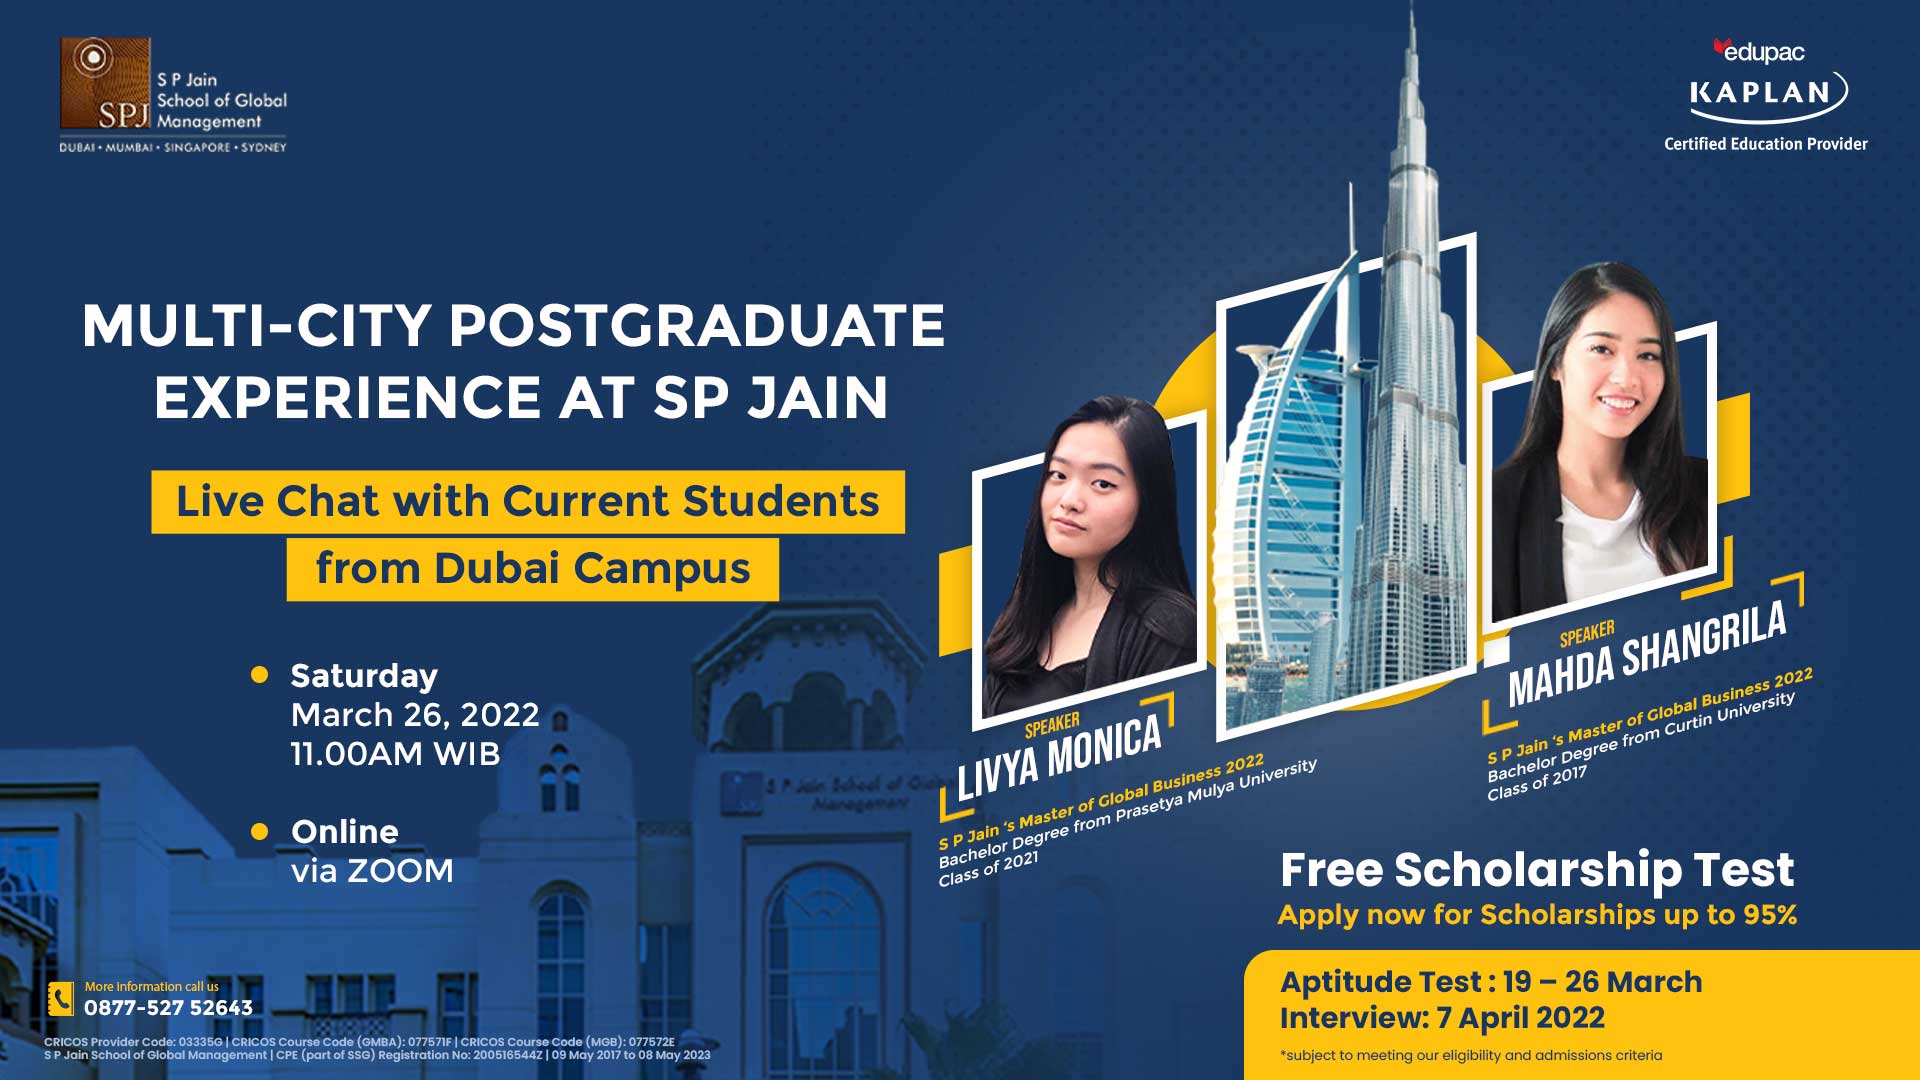 Free Webinar : Virtual Talkshow: MULTI-CITY POSTGRADUATE EXPERIENCE AT SP JAIN “Live Chat with Current Students from Dubai Campus” 